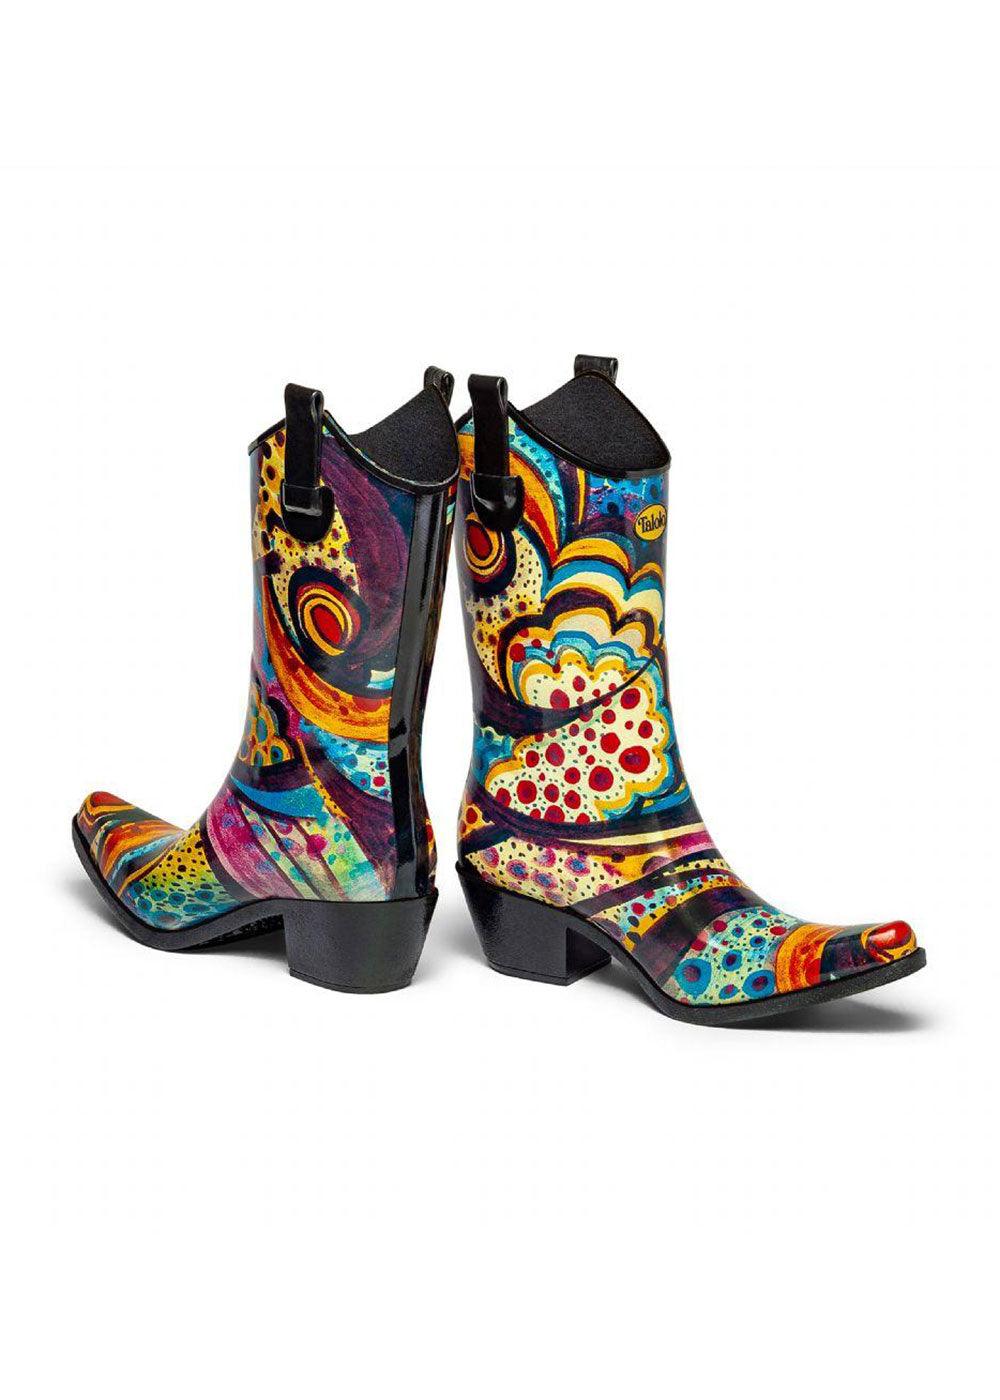 Talolo Floral Bliss Cowboy Boot Wellies - Justina Clothing